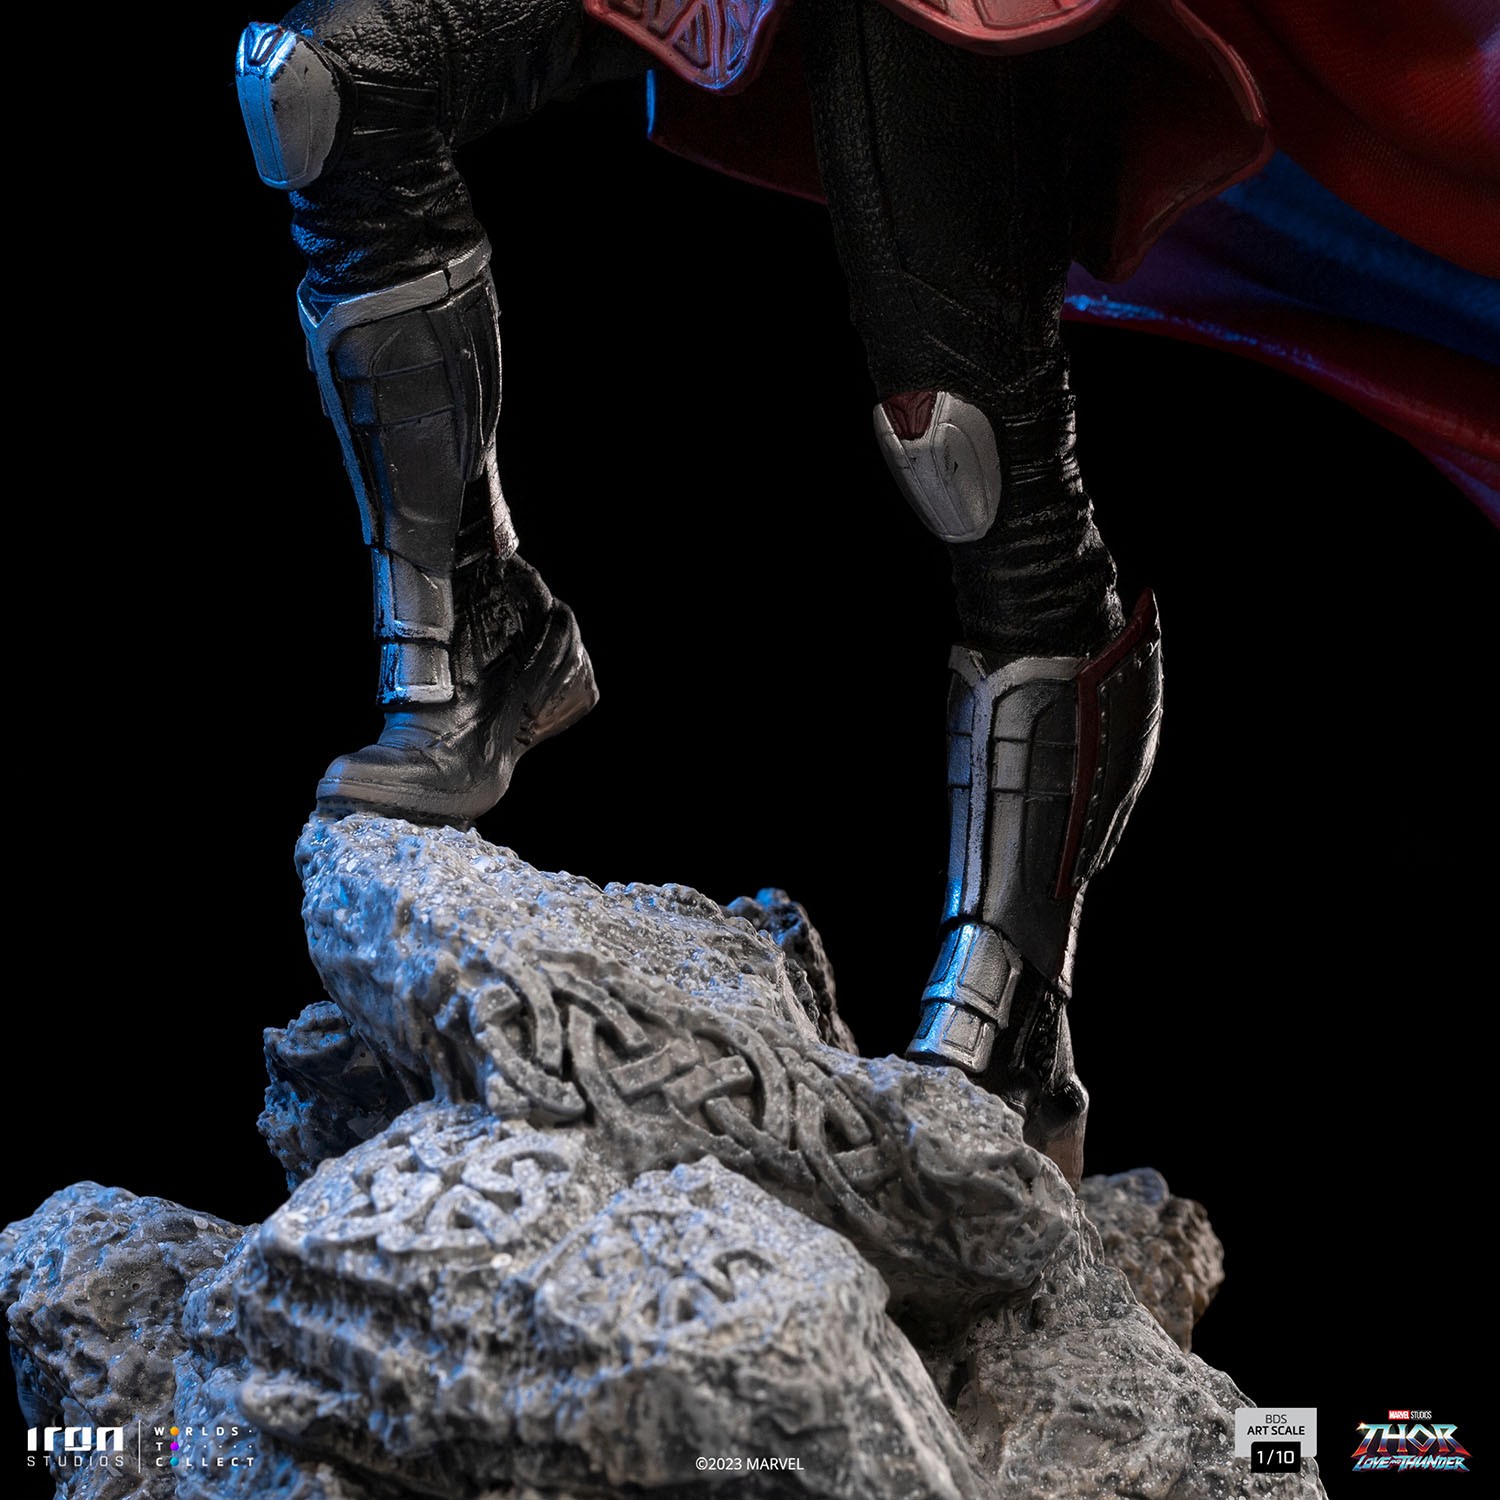 Mighty Thor (Jane Foster)